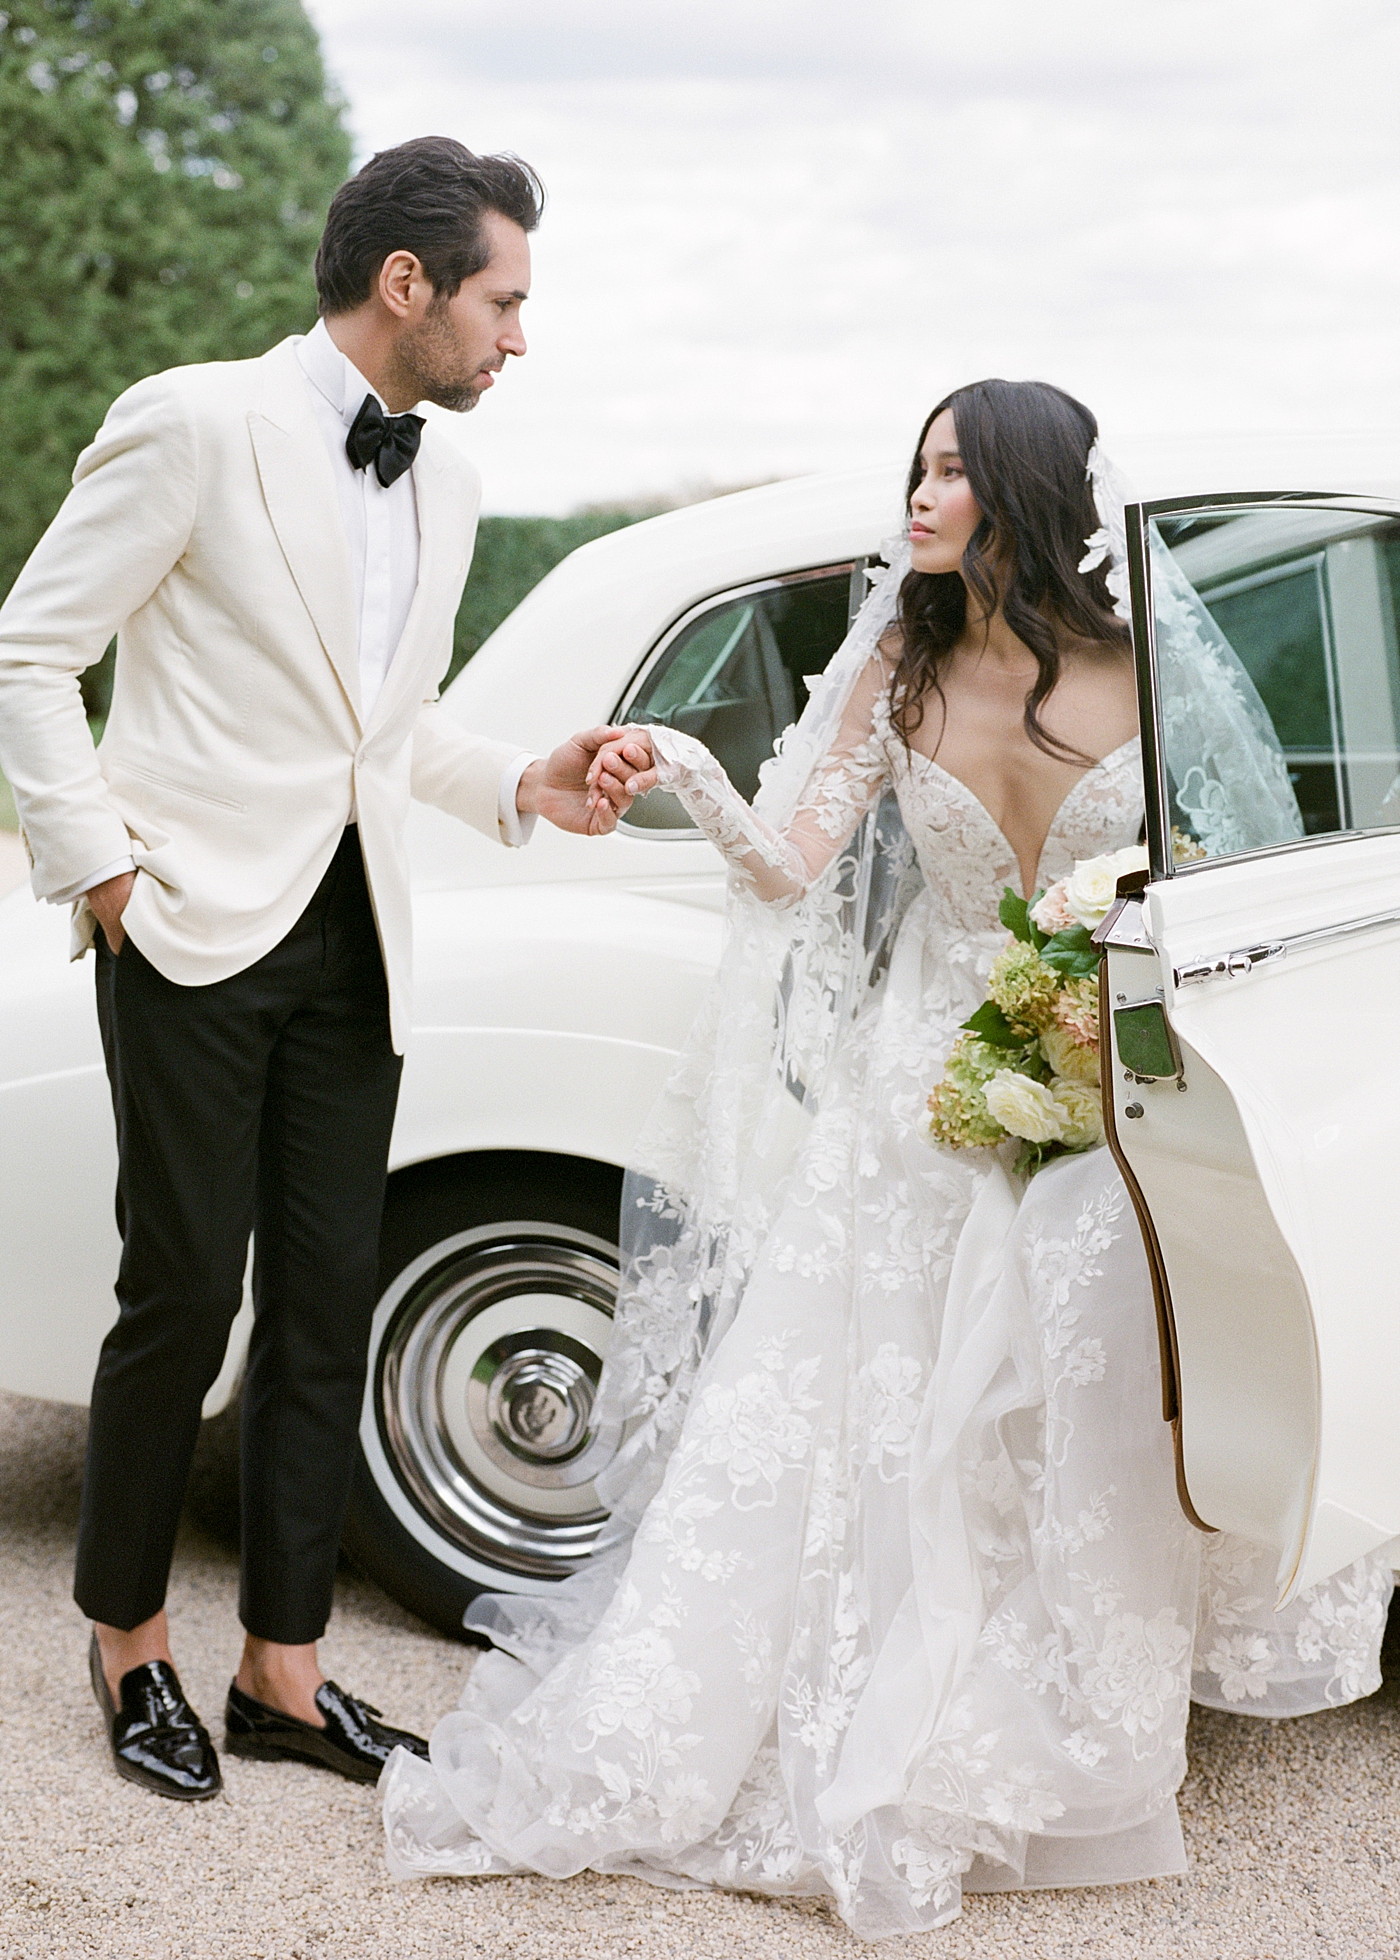 Bride and groom getting out of a classic car in a gravel driveway during Oheka castle wedding | Image by Hope Helmuth Photography